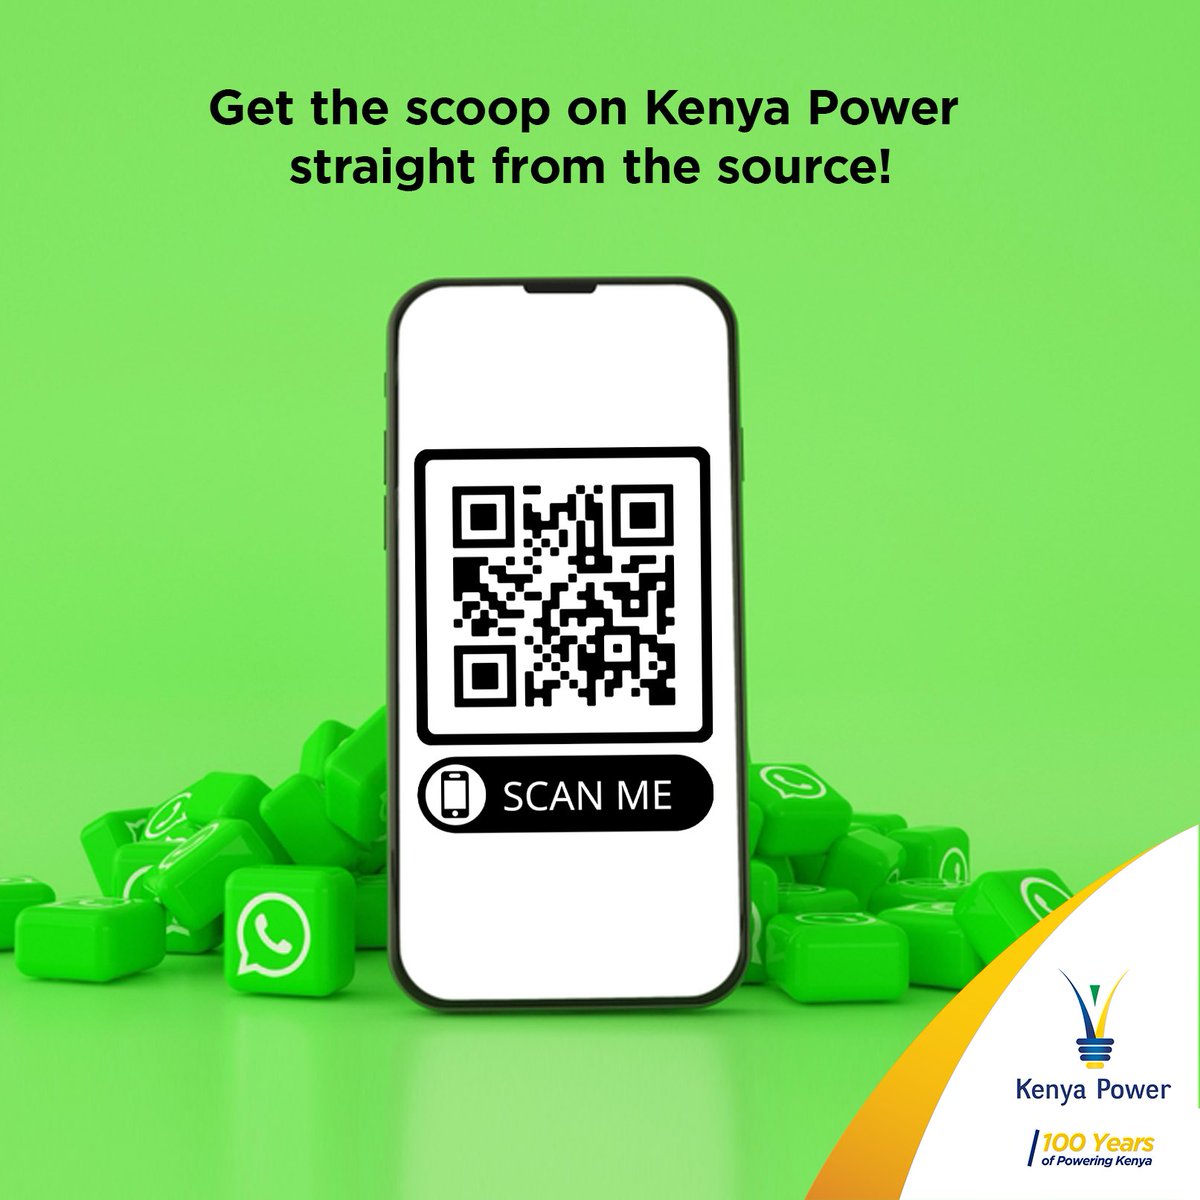 Get all first-hand Kenya Power news and latest updates on Woozap! Click tinyurl.com/KPLCWhatsApp or simply scan the QR code to follow. ^JC